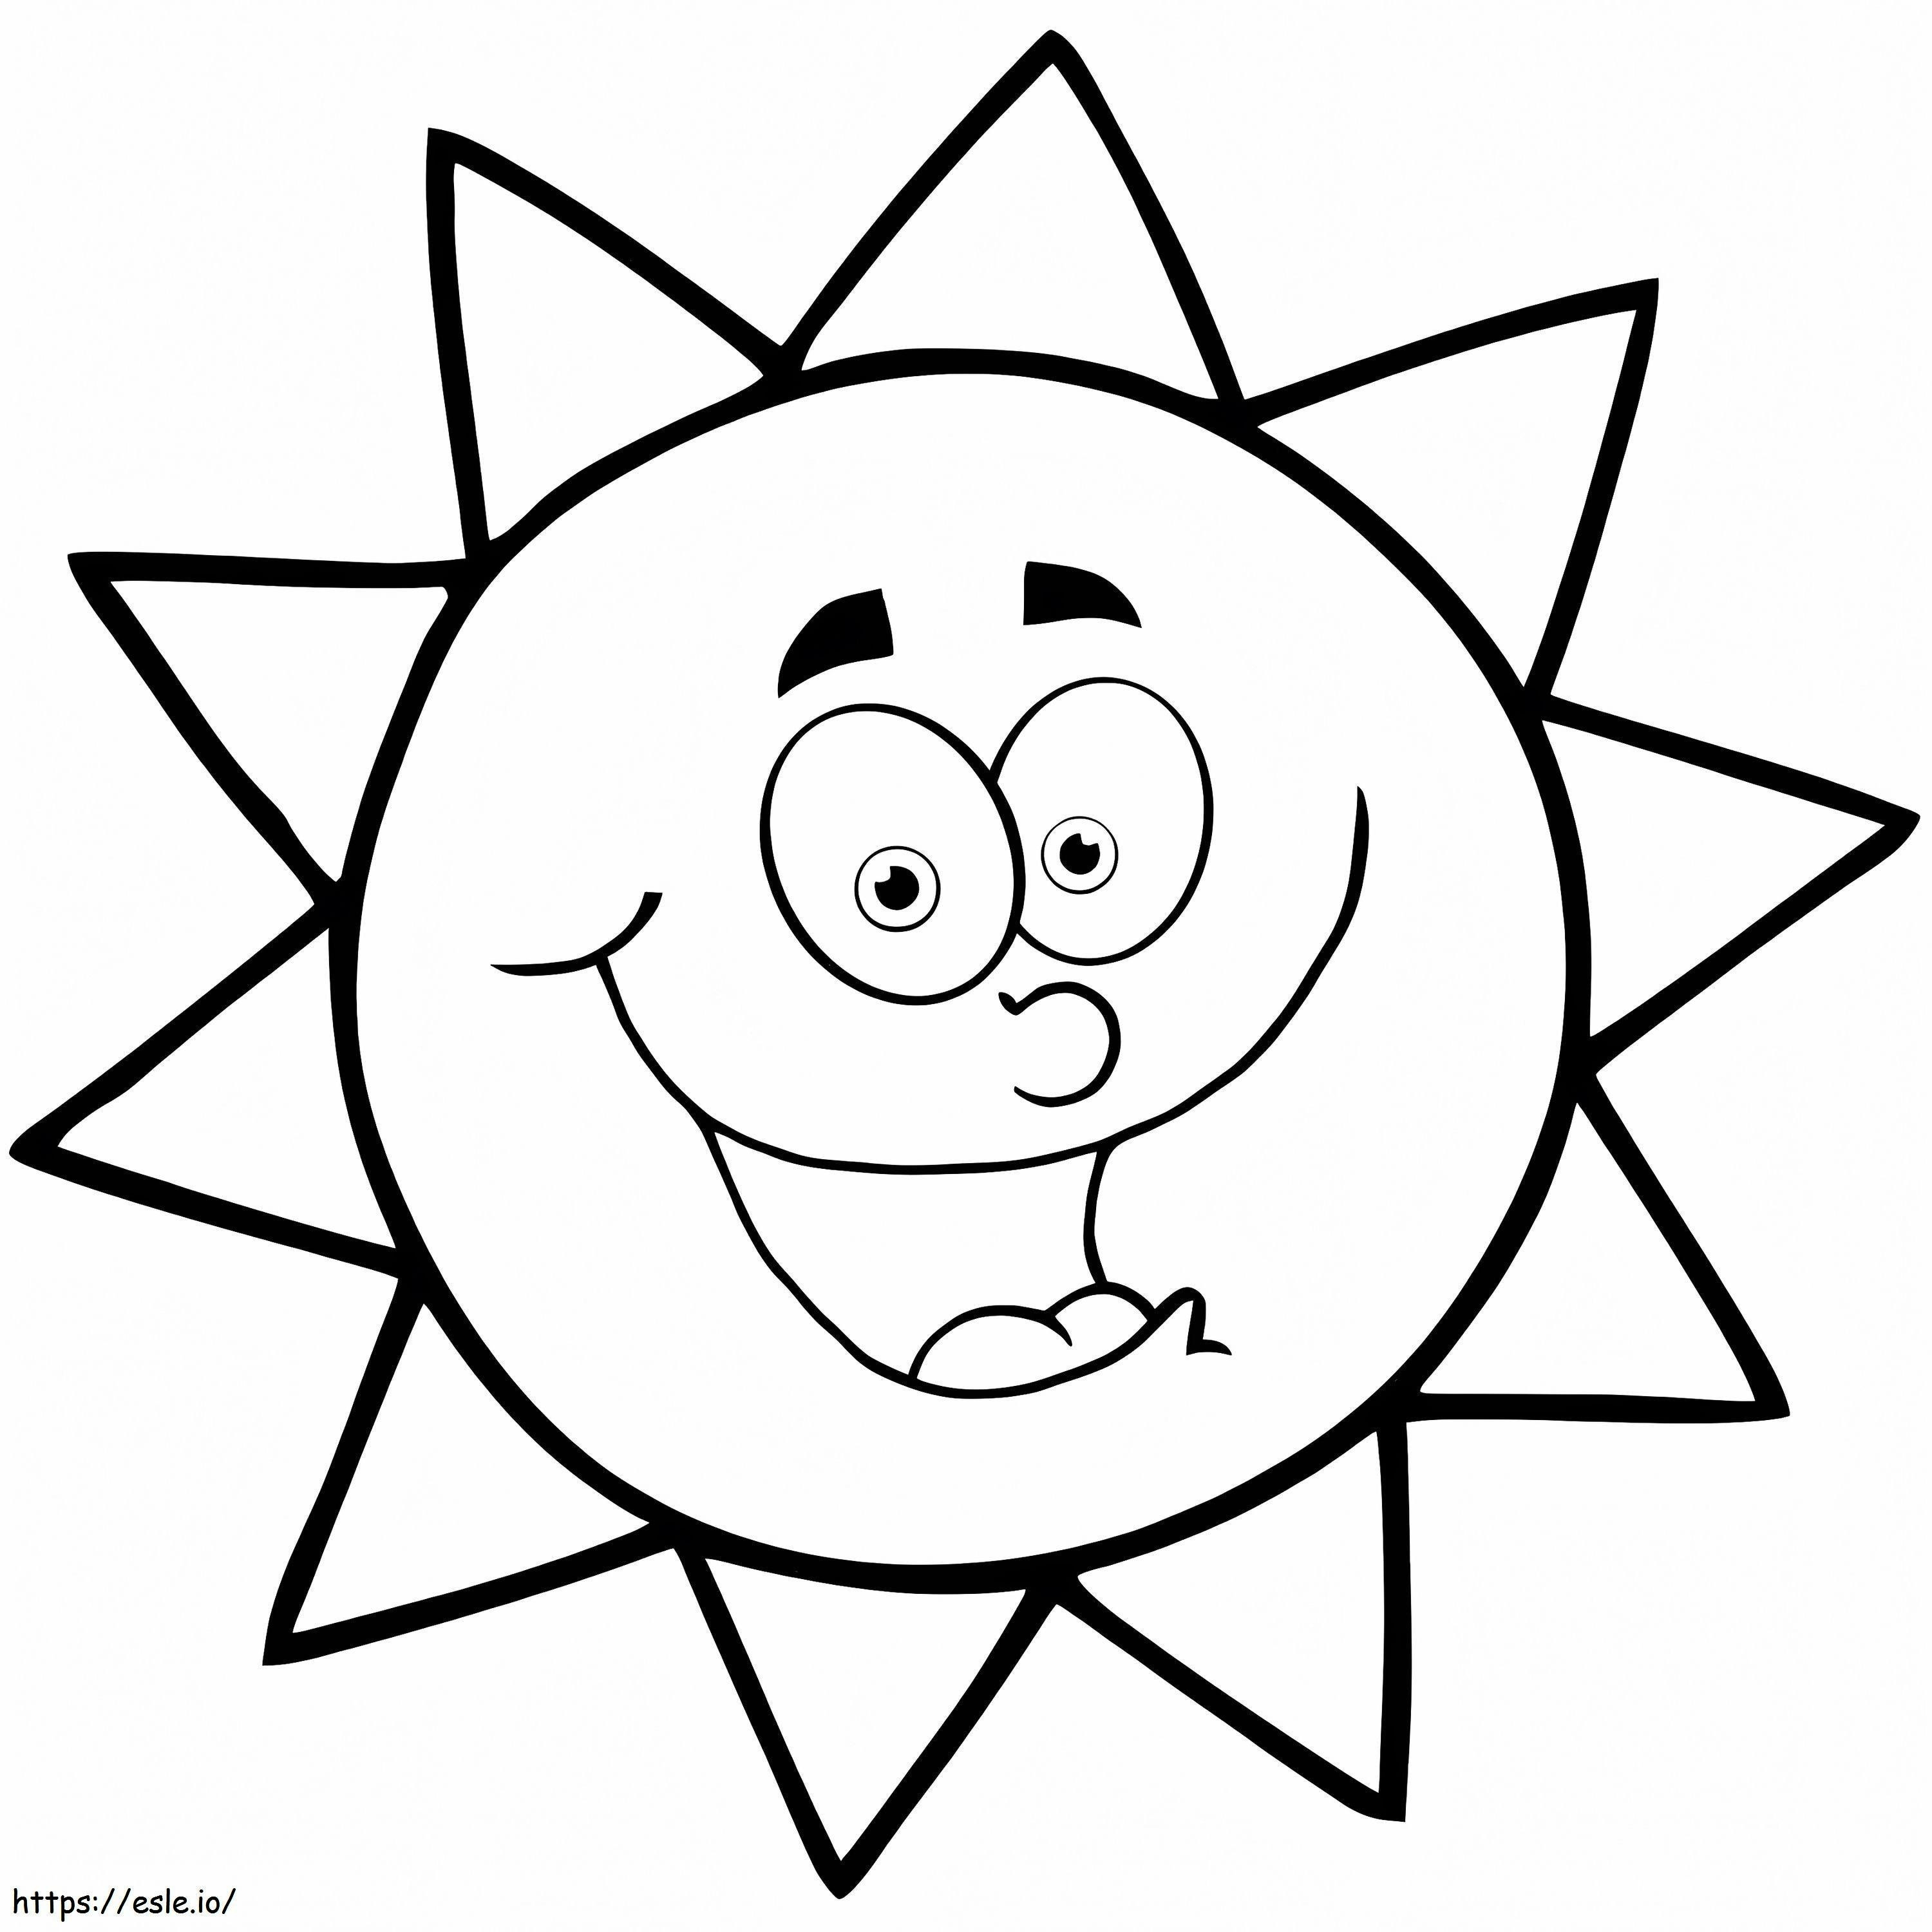 Happy Sun Smiling coloring page